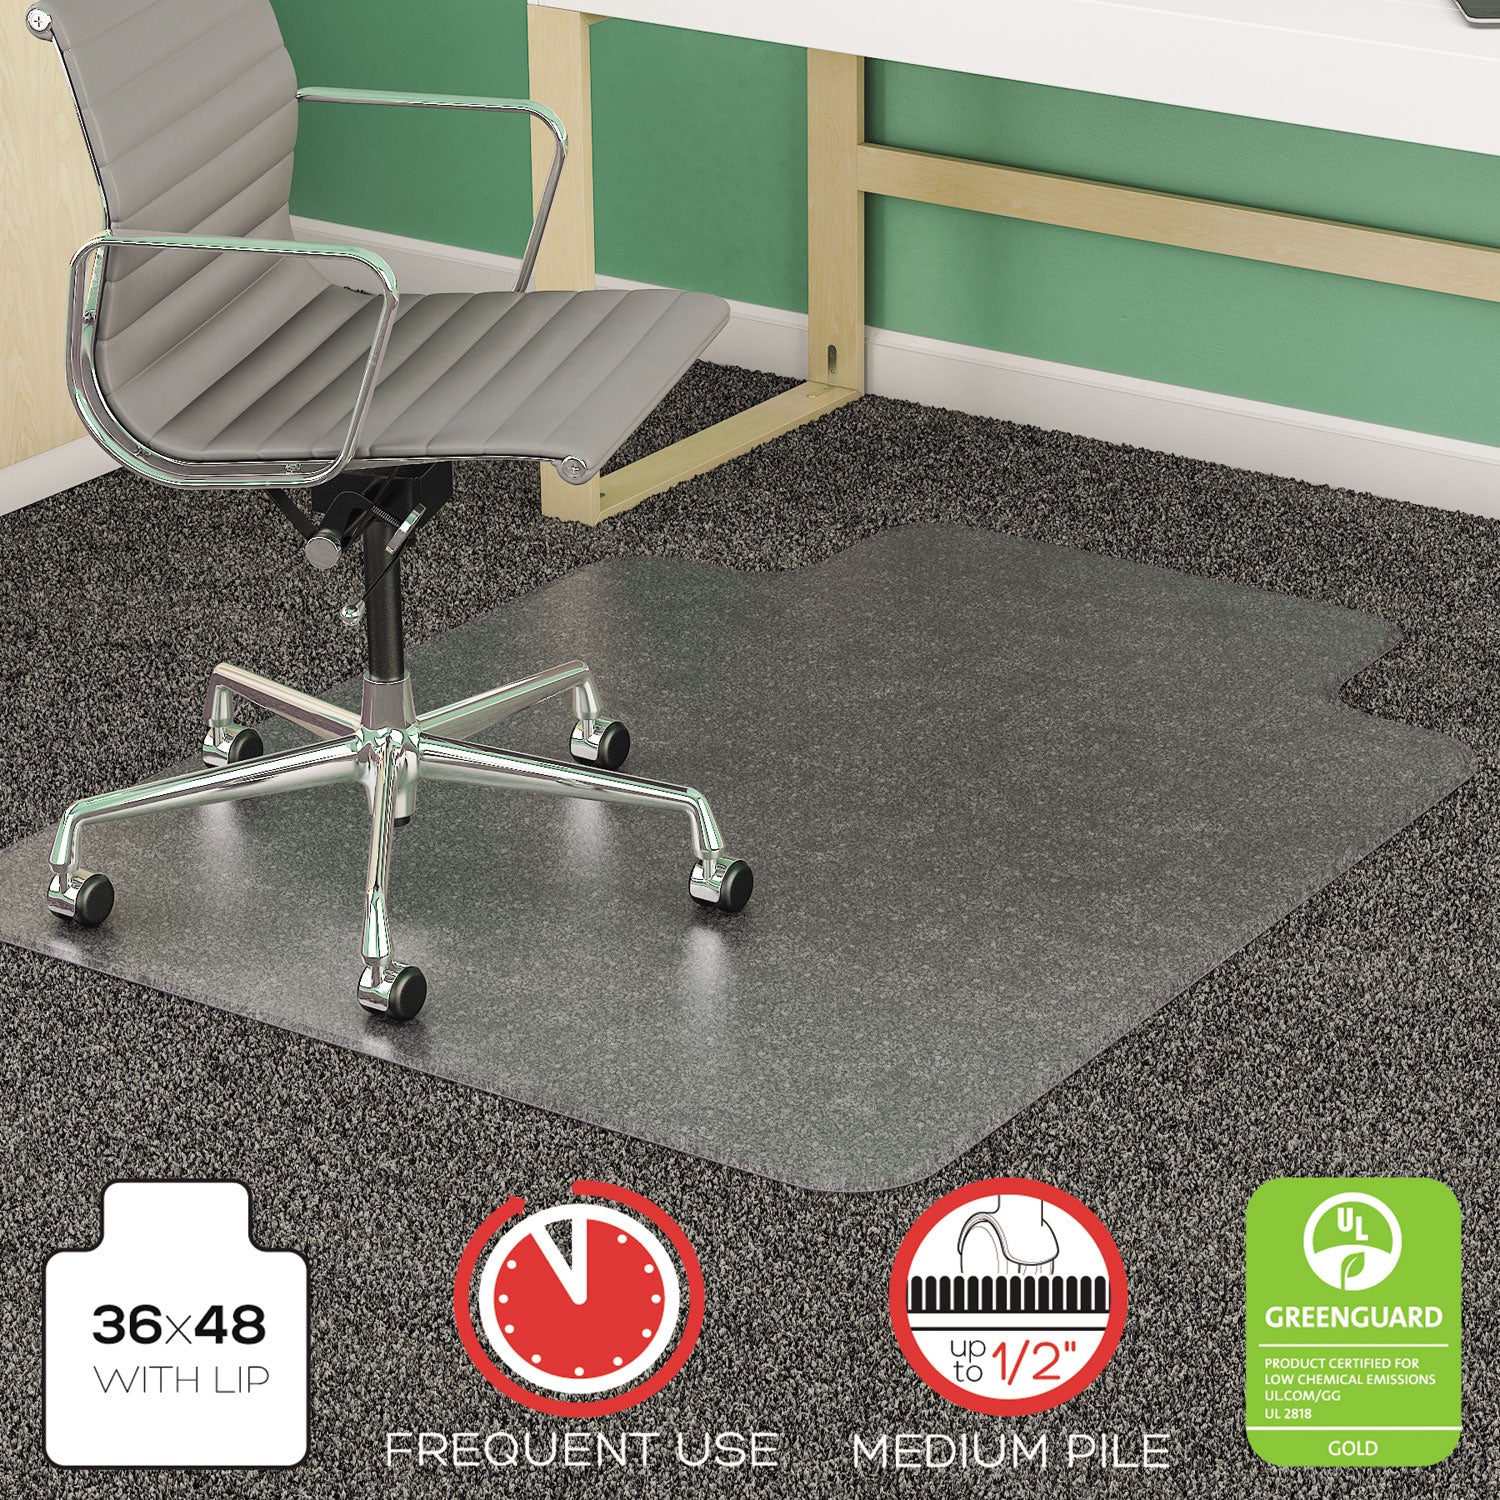 SuperMat Frequent Use Chair Mat, Med Pile Carpet, Flat, 36 x 48, Lipped, Clear - 